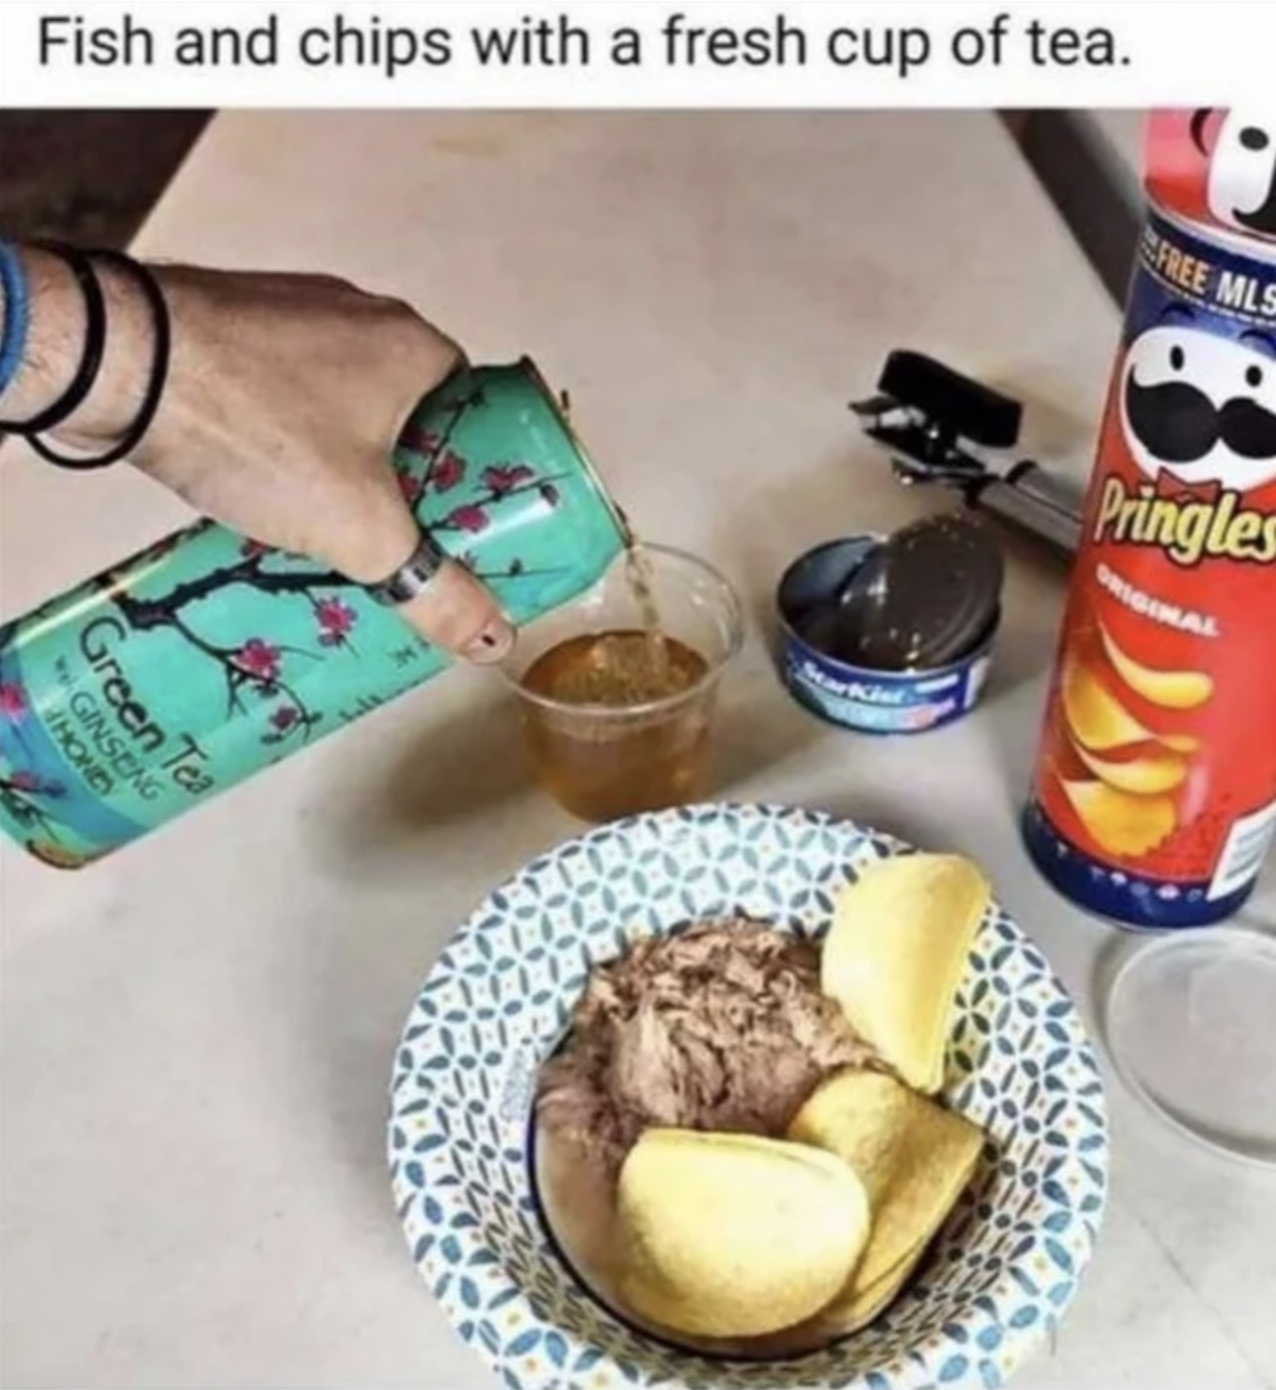 Pictures that techincally tell the truth - fish and chips tuna pringles - Fish and chips with a fresh cup of tea. Ginseng Green Tea Hond Free Mls Pringles Priginal